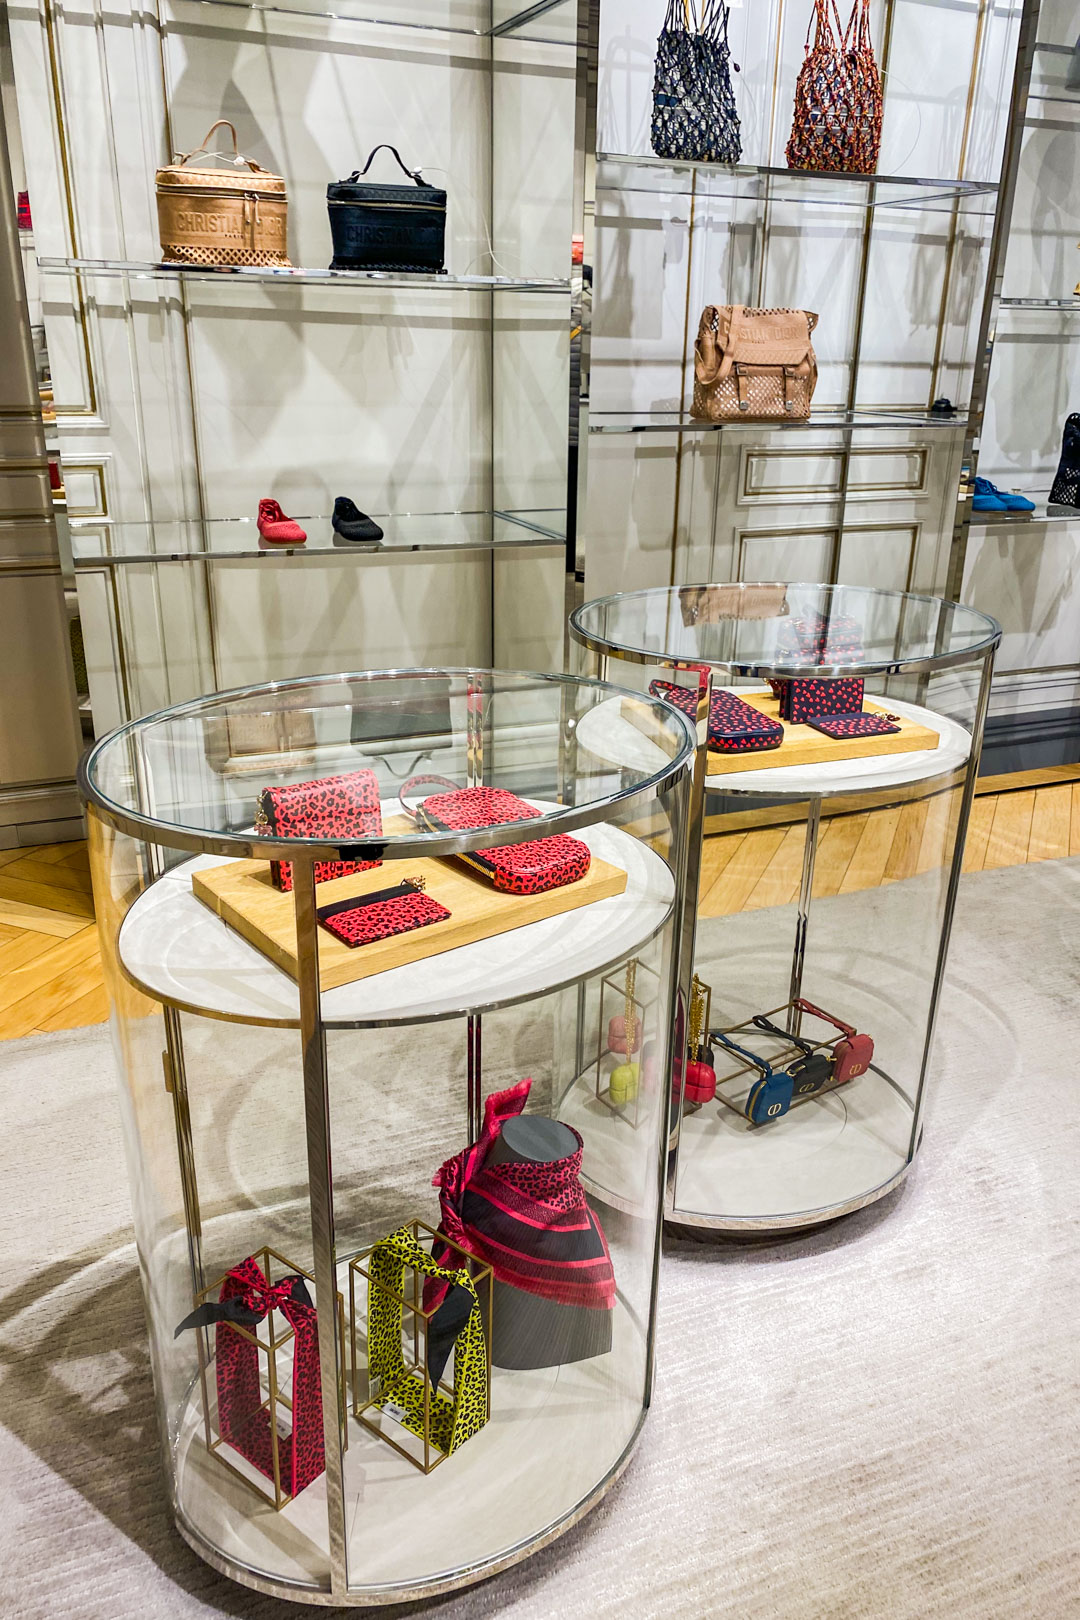 The Ultimate Guide to the Christian Dior Outlet - The Luxury Lowdown